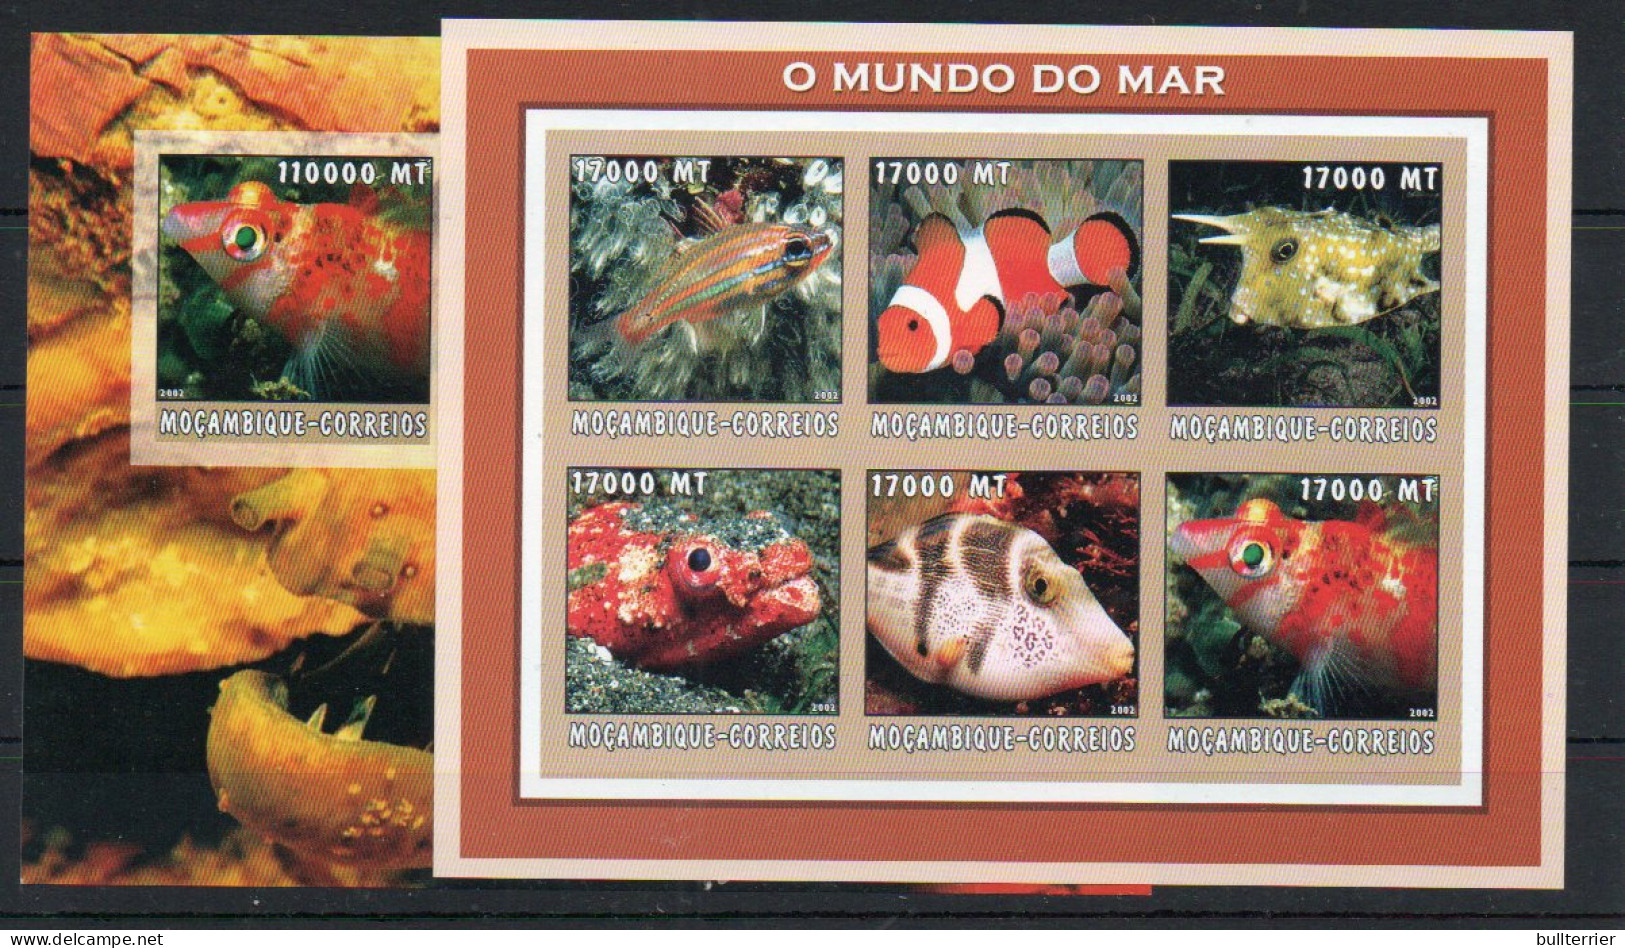 MOZAMBIQUE - 2002 - TROPICAL FISH SHEETLET OF 6 + SOUVENIR SHEET IMPERFORATE  MINT NEVER HINGED - Mozambique